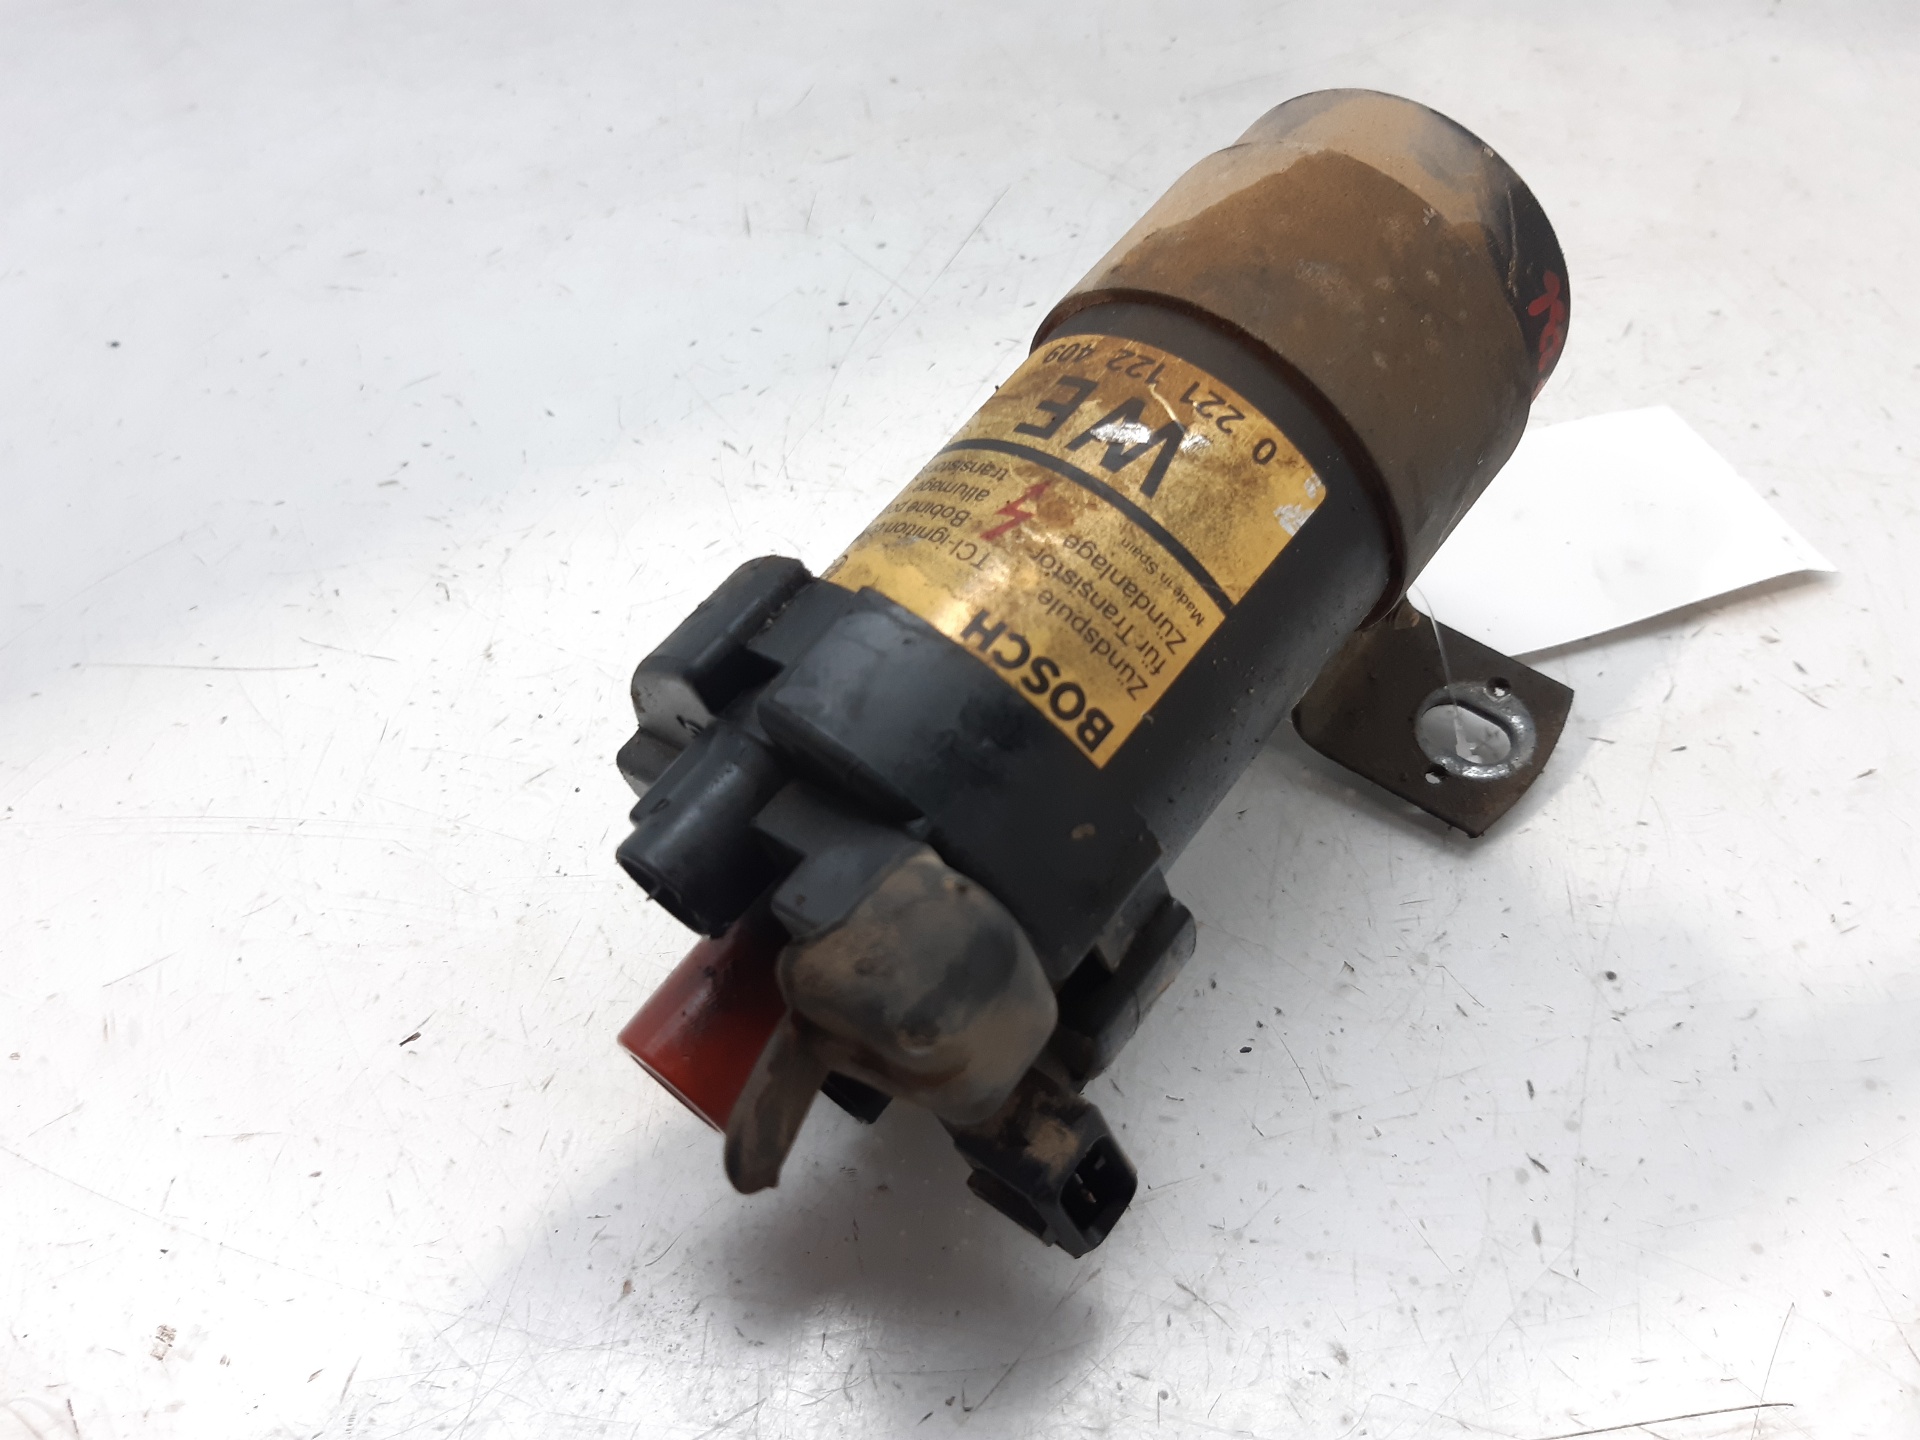 OPEL Vectra A (1988-1995) High Voltage Ignition Coil 0221122409 22305171